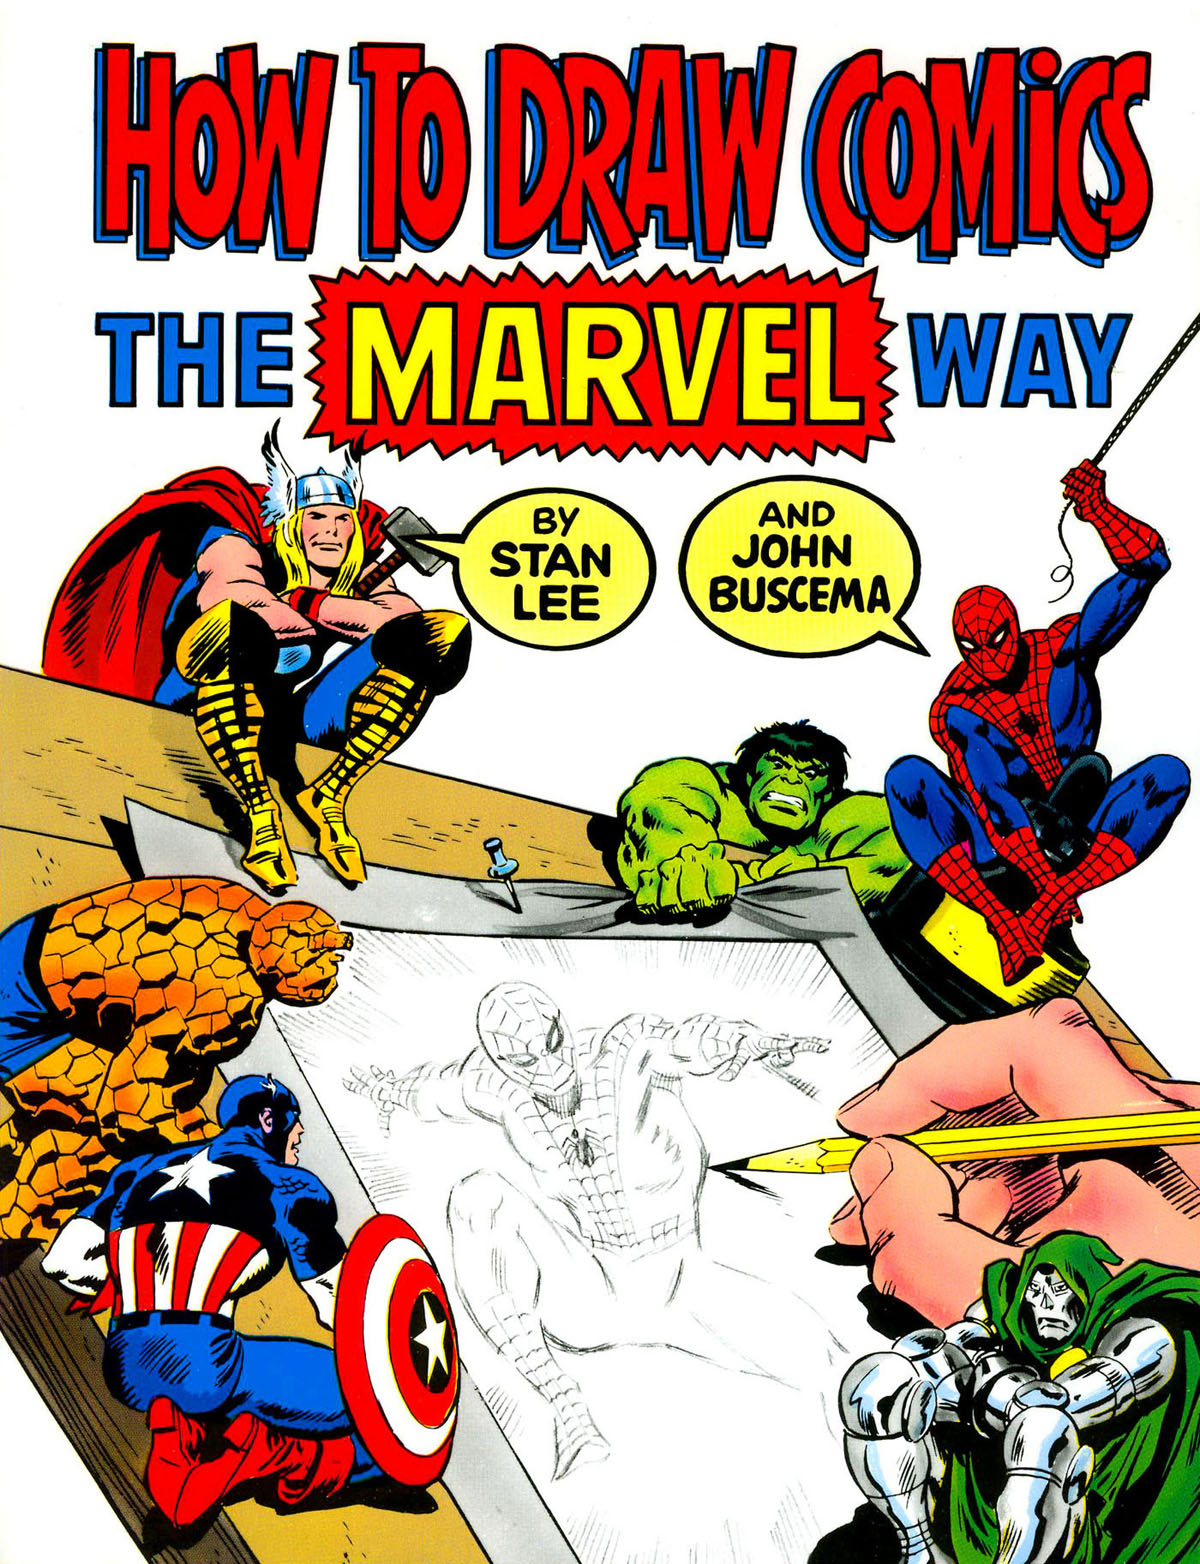 Read online How to Draw Comics the Marvel Way comic -  Issue # TPB - 1